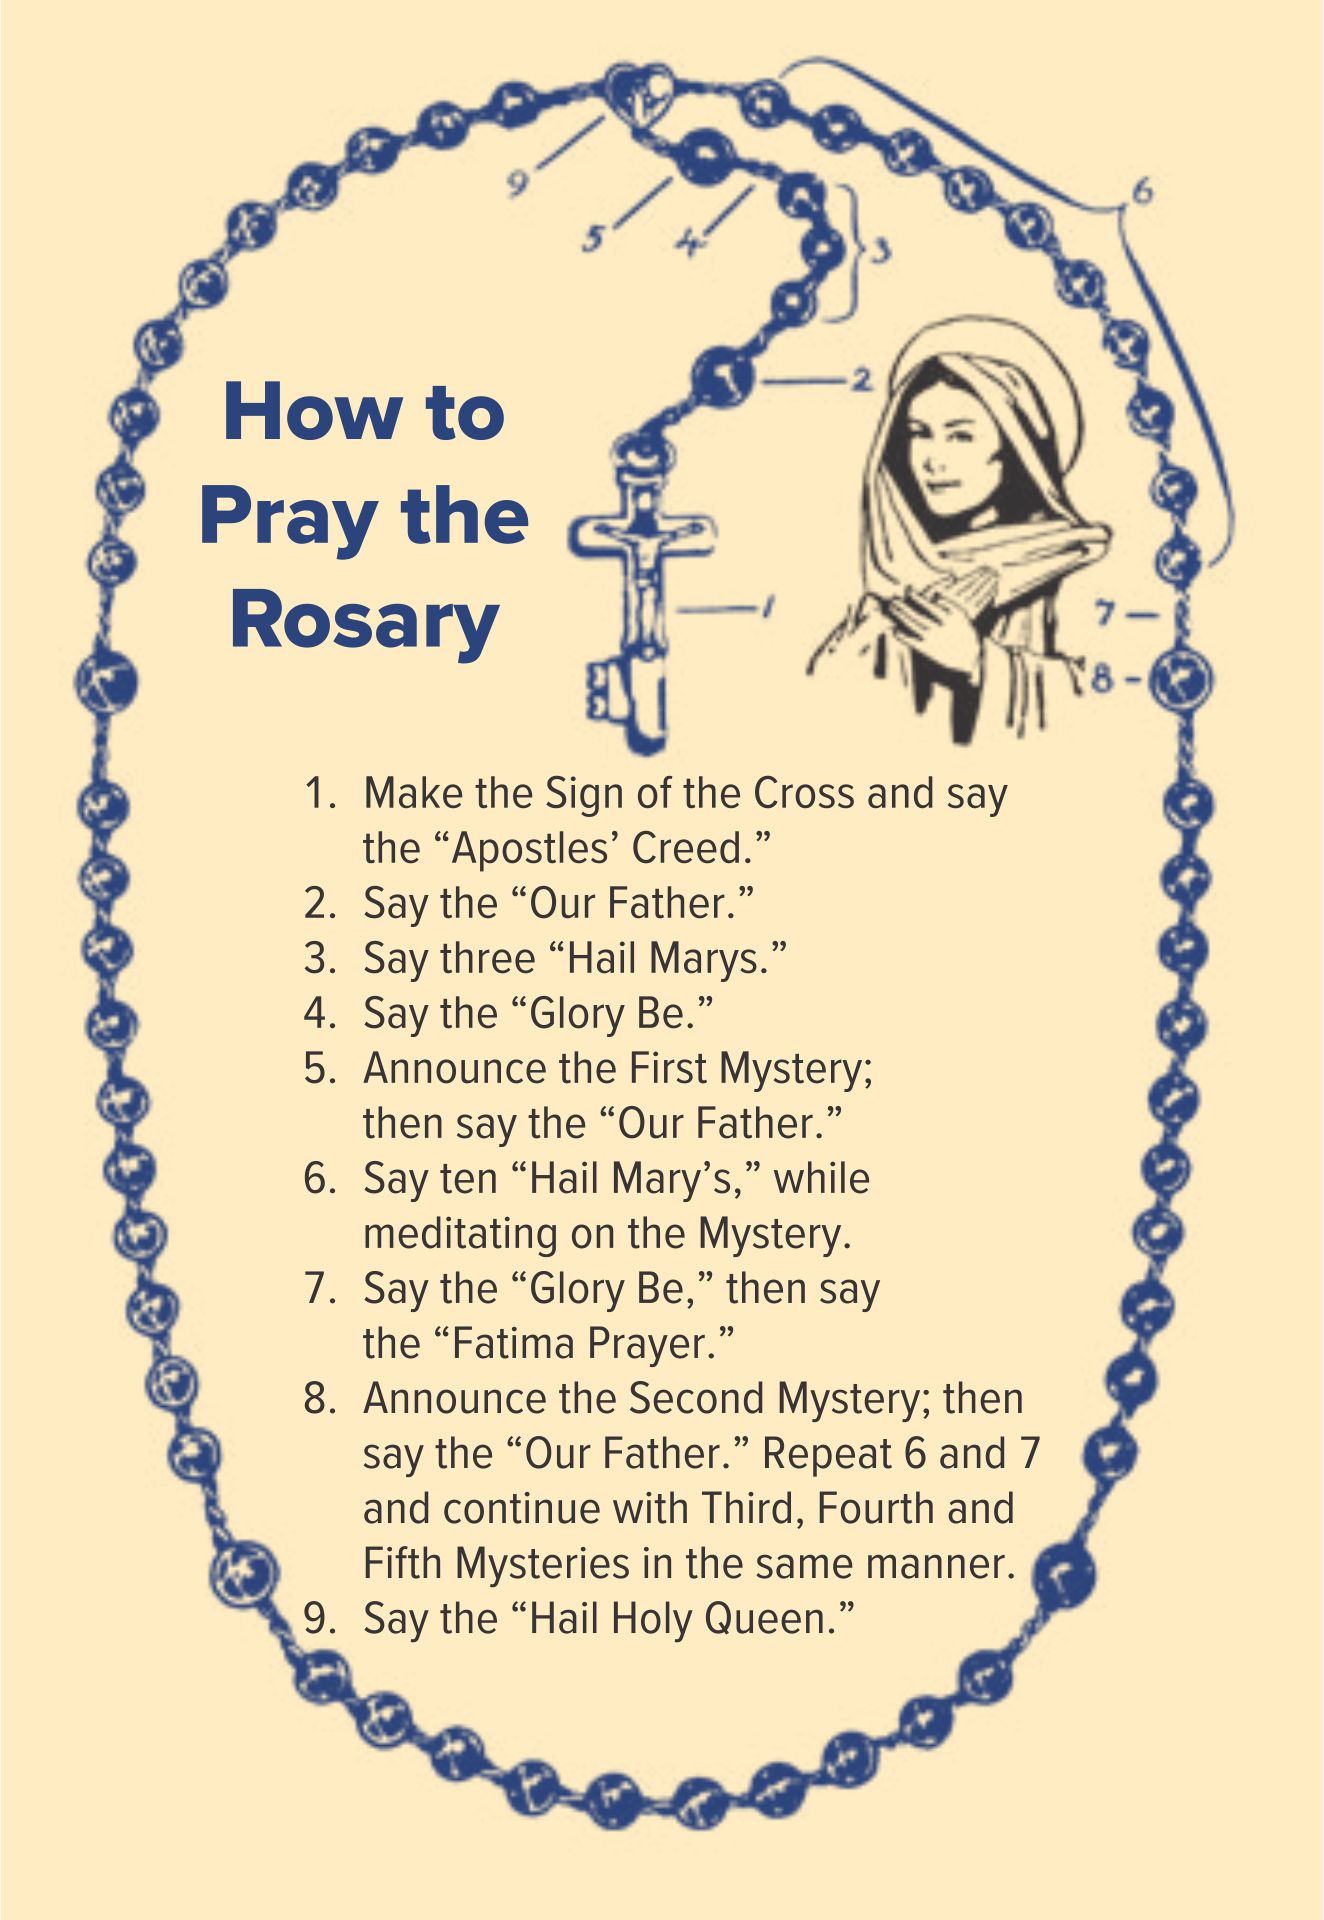 7-best-images-of-printable-rosary-pamphlet-fold-how-to-pray-the